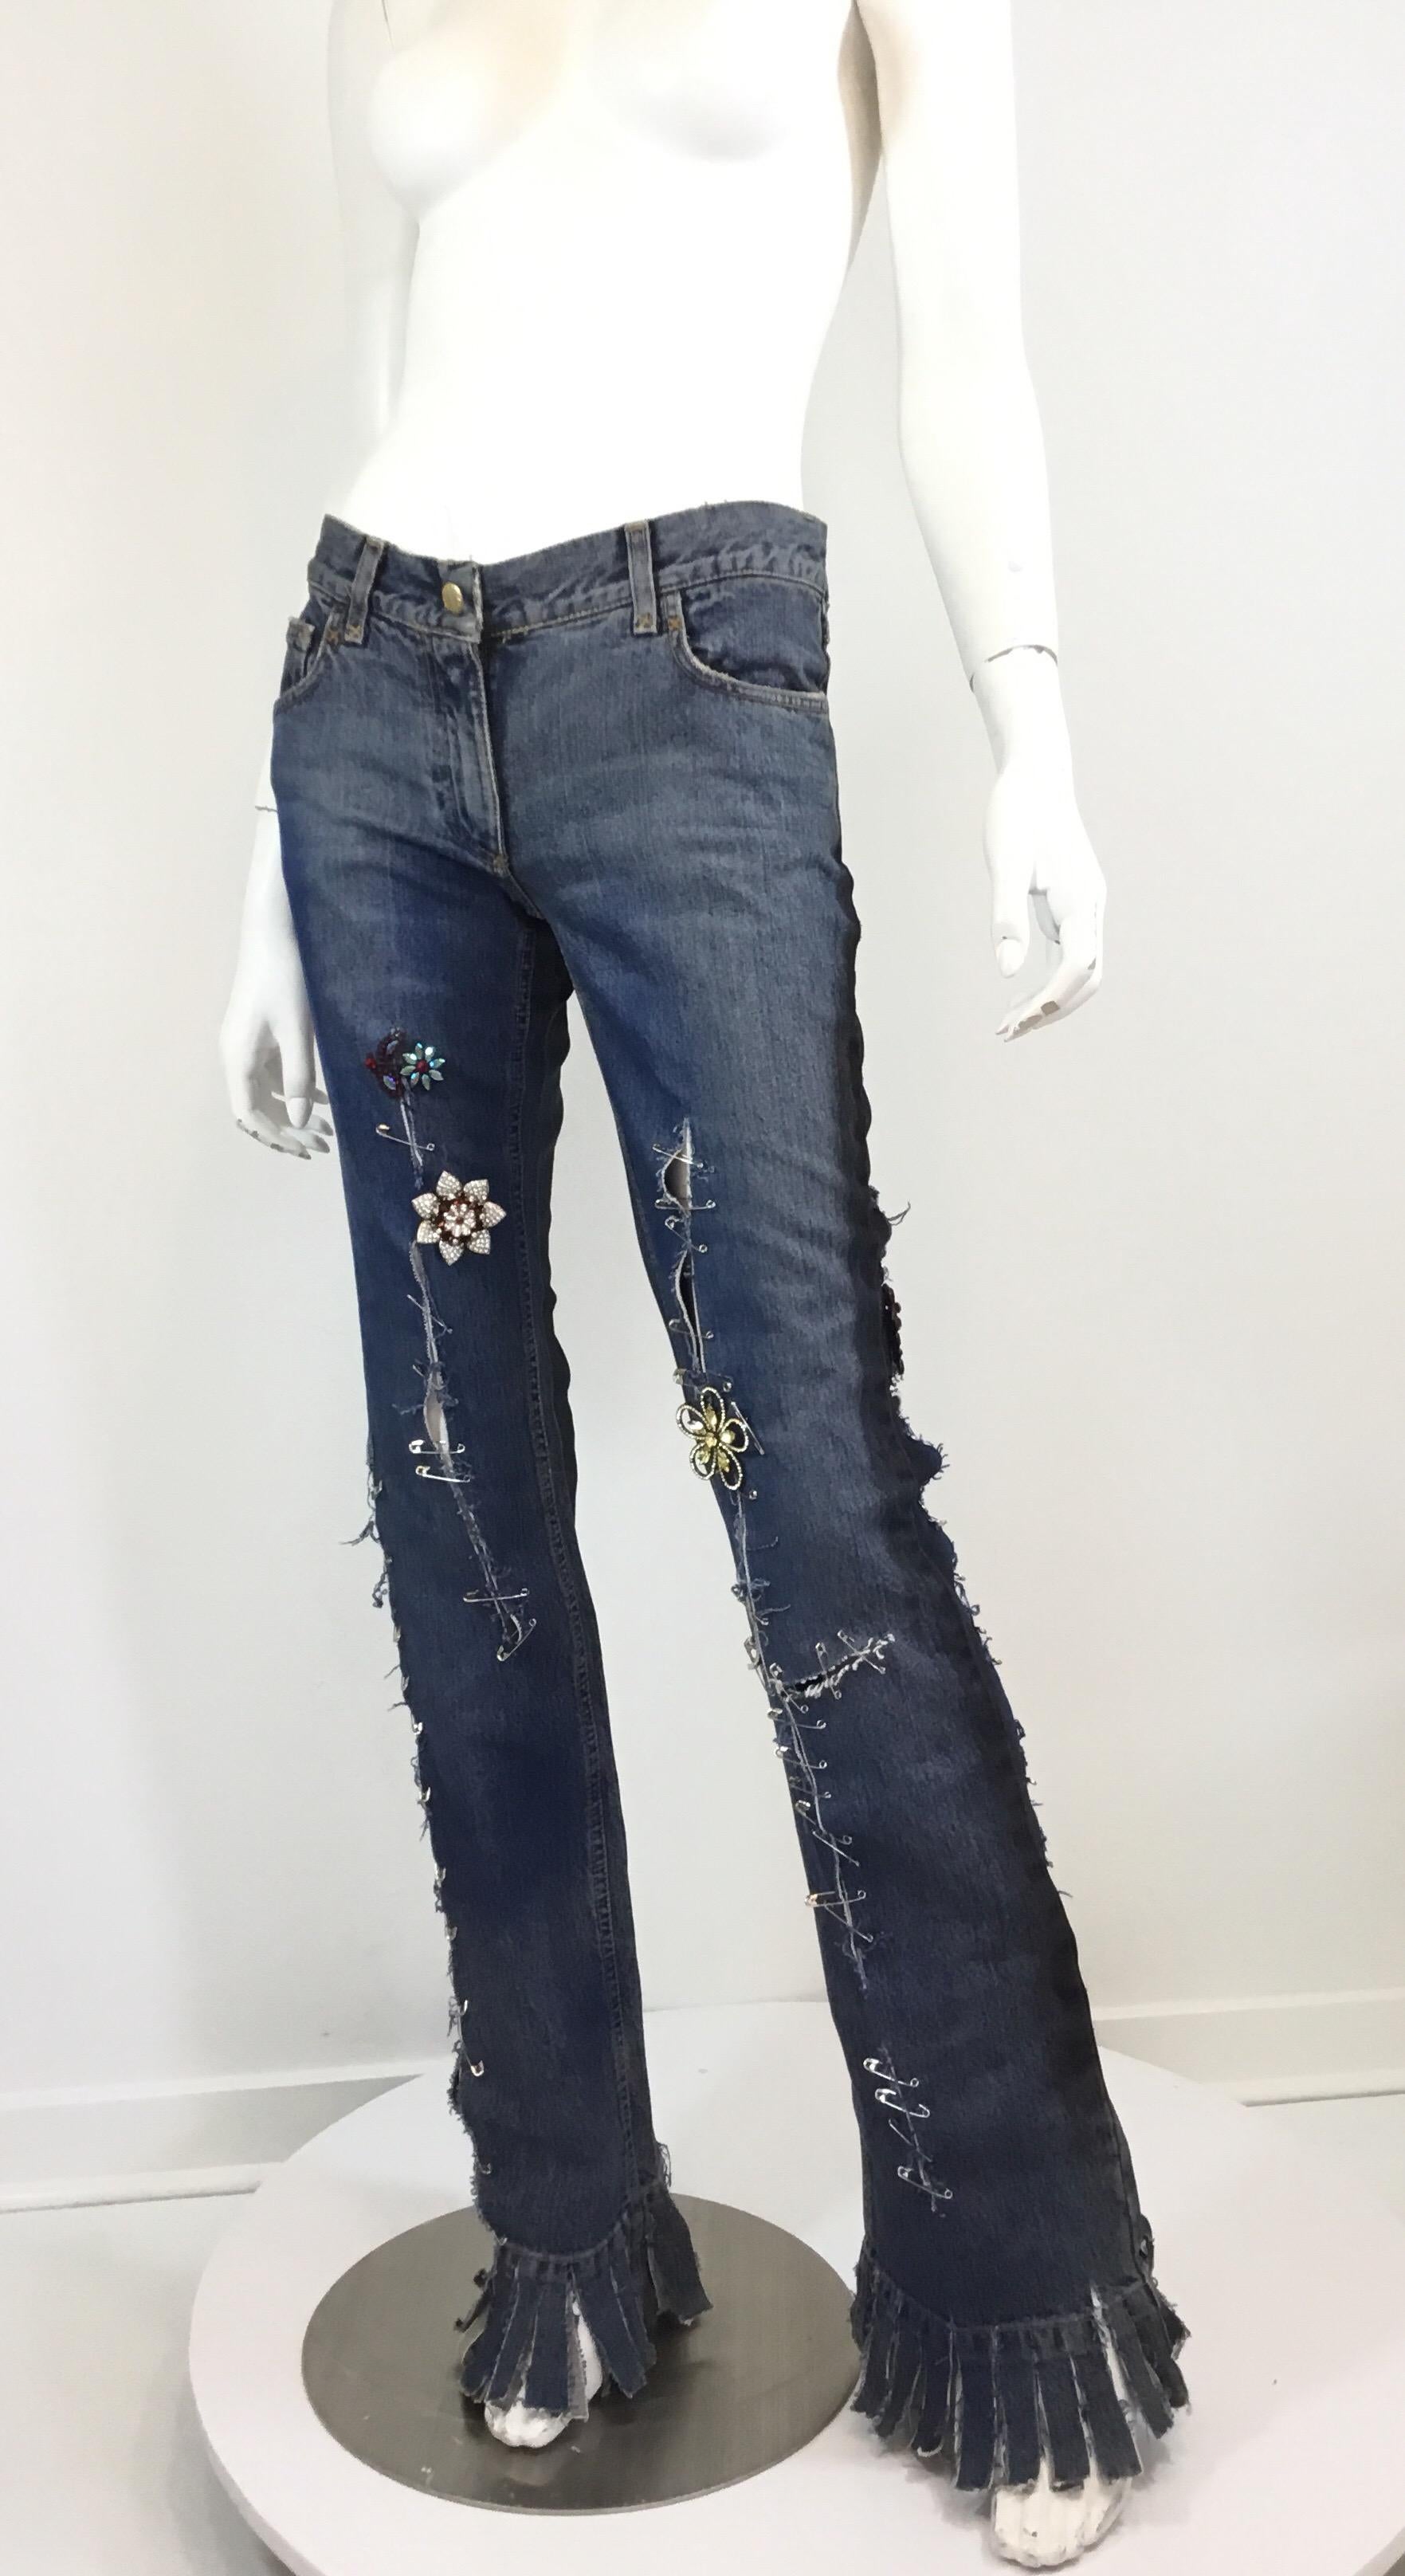 Dolce and Gabbana Jeans with safety pin detailing throughout and jeweled pins, car wash Pleated hem. Zipper and button fastening with functional front and back pockets. Size 40, made in Italy, 100% Cotton.

Measurements:
Waist 28”, hips 35”, inseam